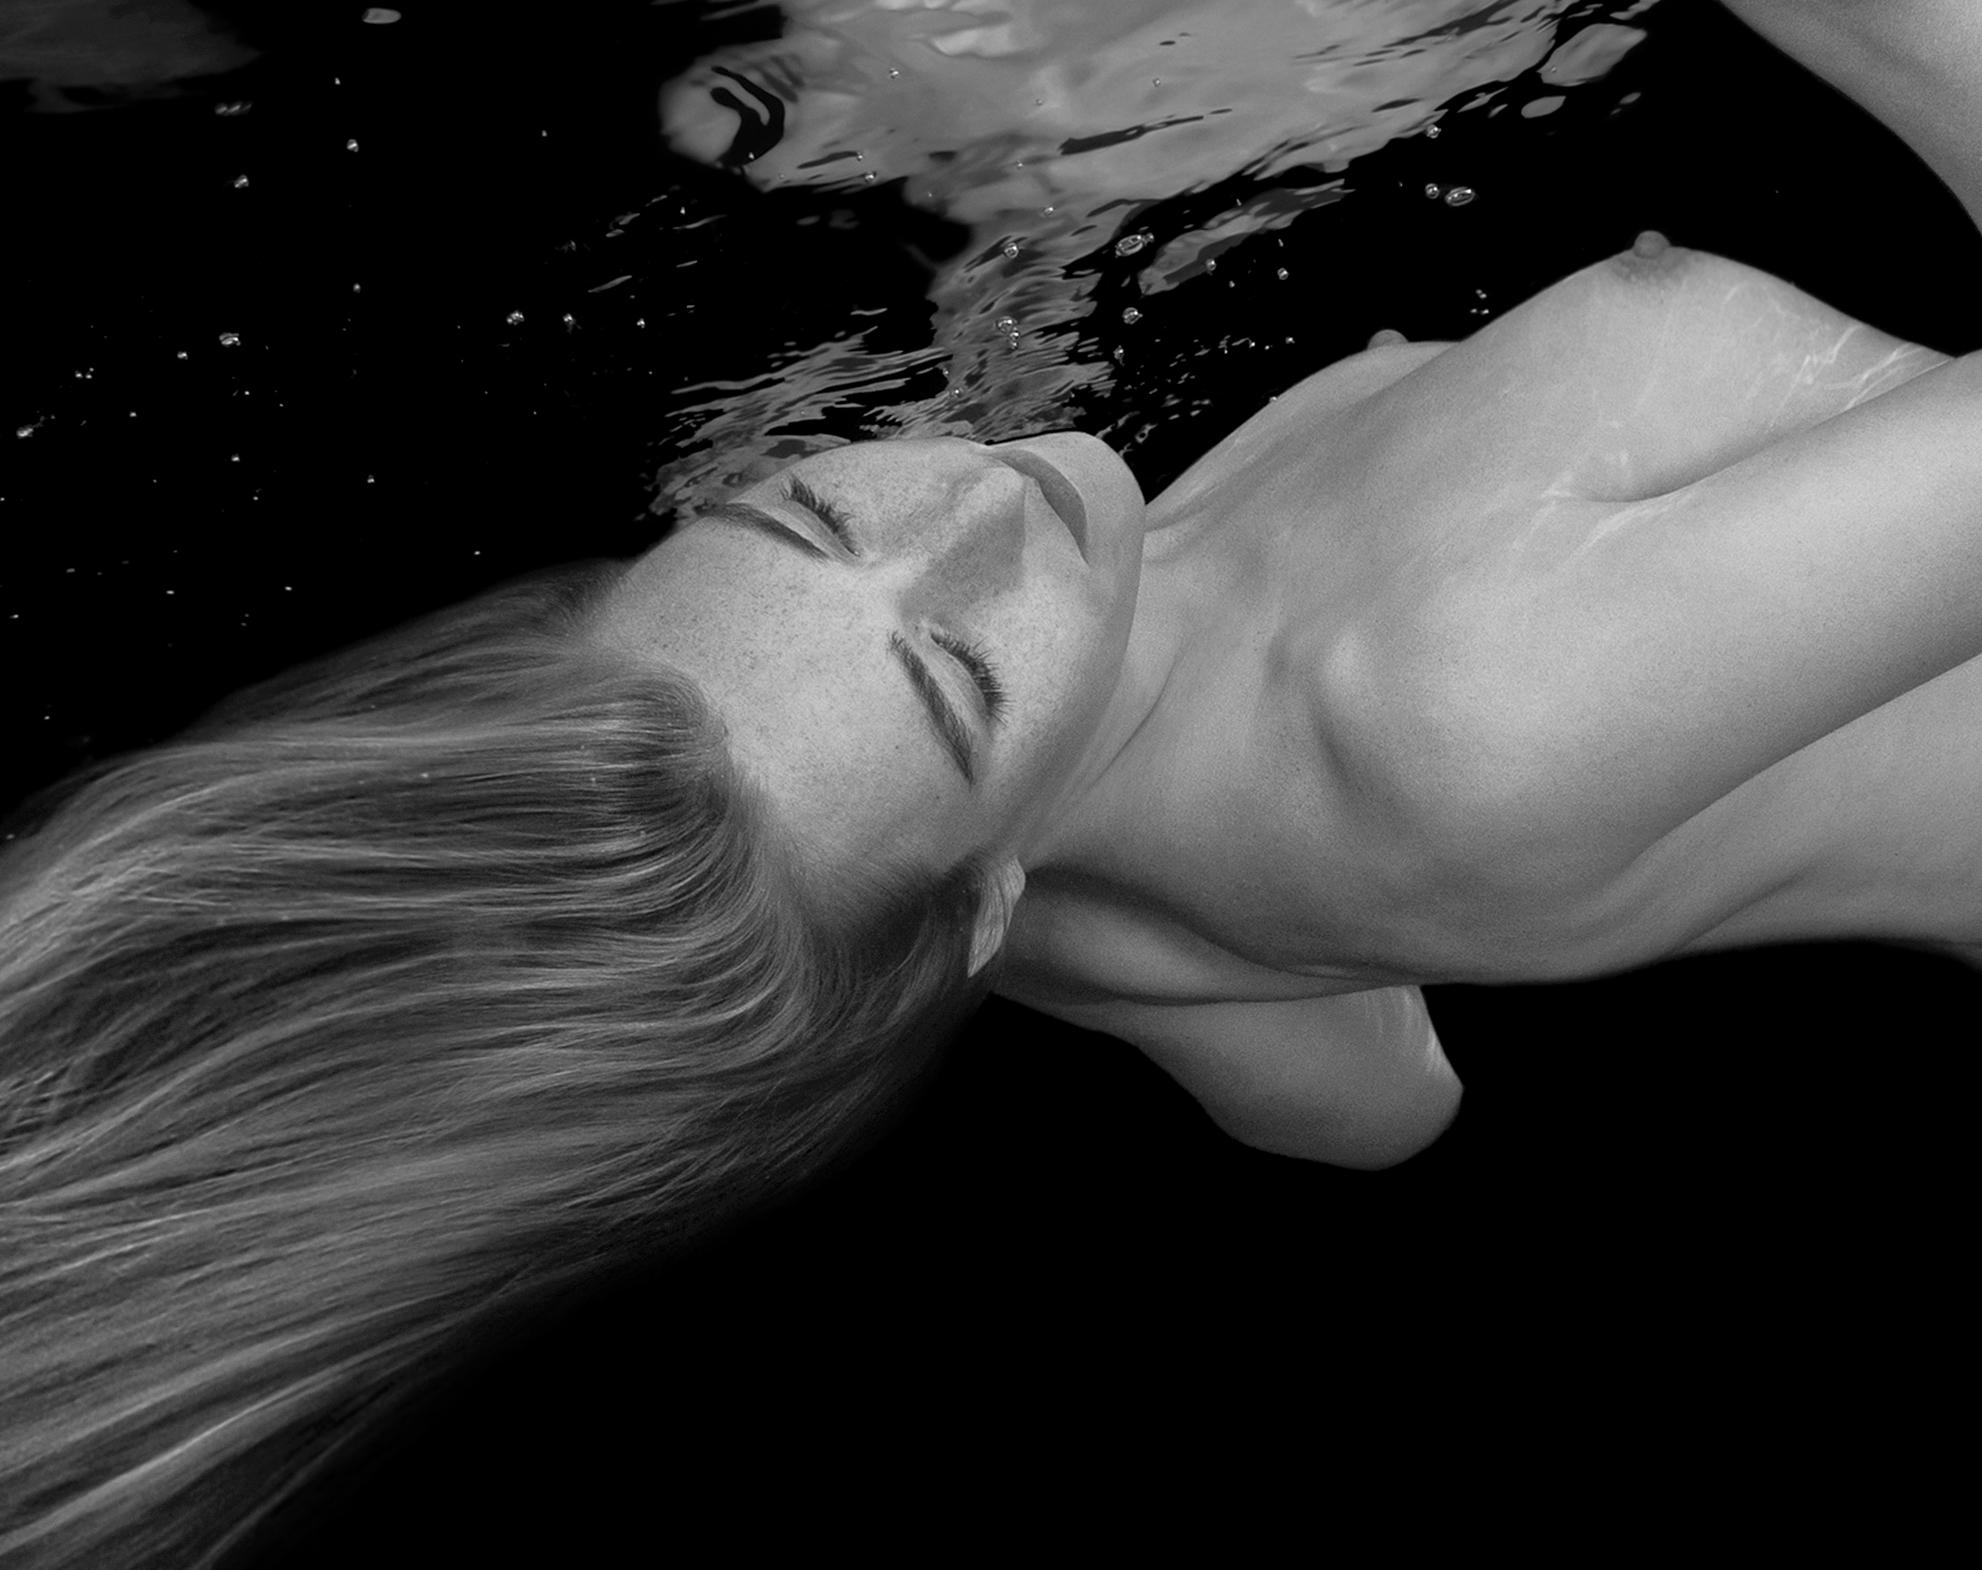 The Touch - underwater black & white nude photograph - archival pigment 43x64